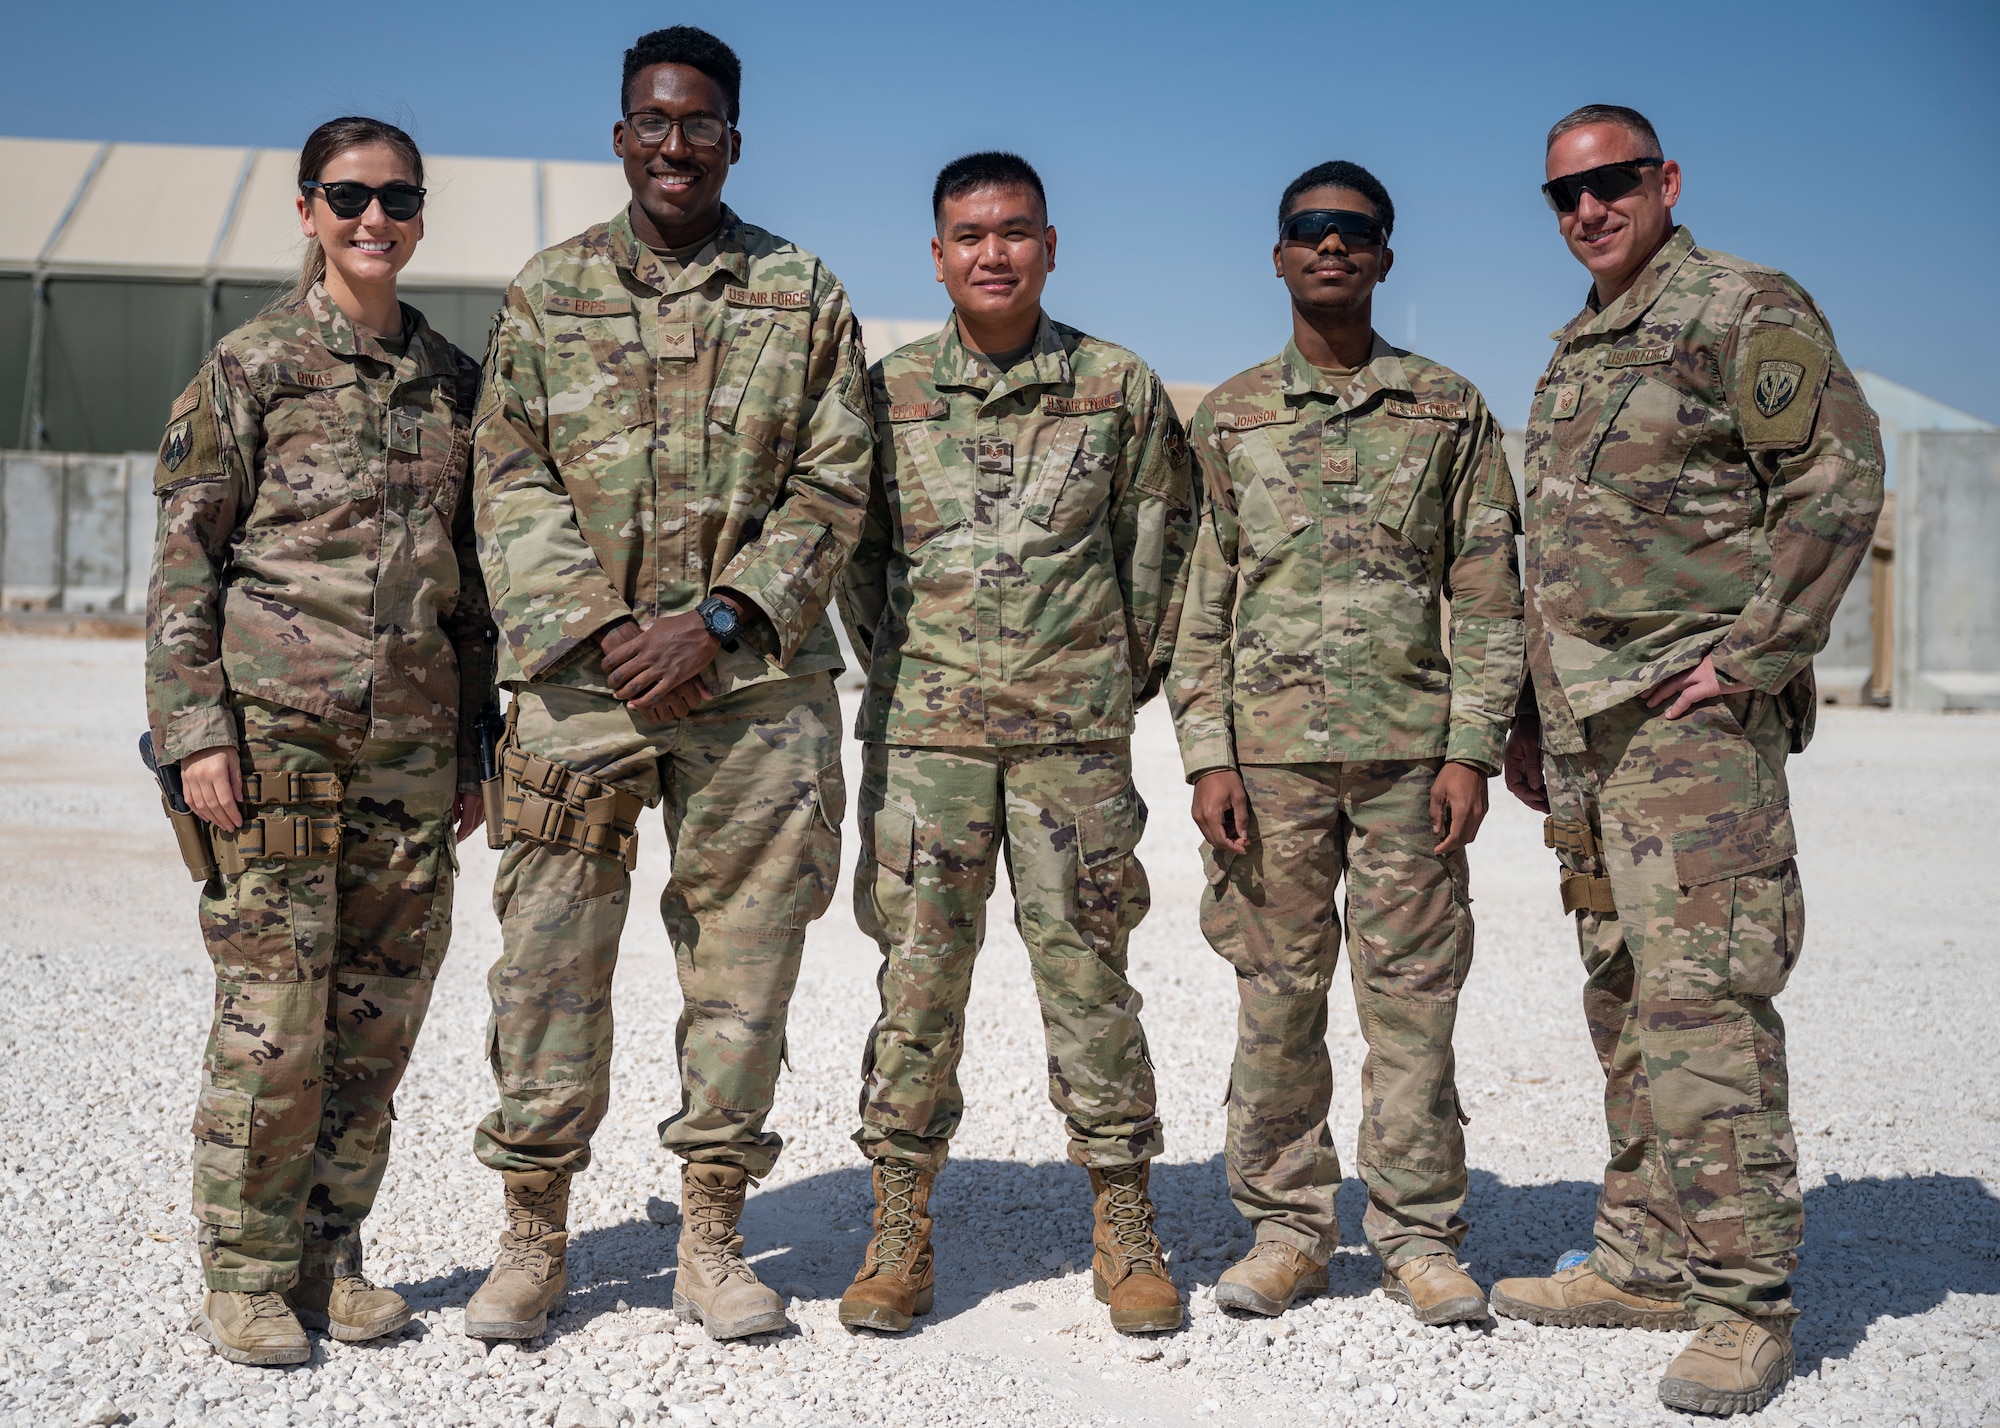 Joint Expeditionary Tasked/Individual Augmentees members for the Special Operations Forces Logistics Element pose for a group photo at Al Asad Air Base, Iraq, Sept. 25, 2021.